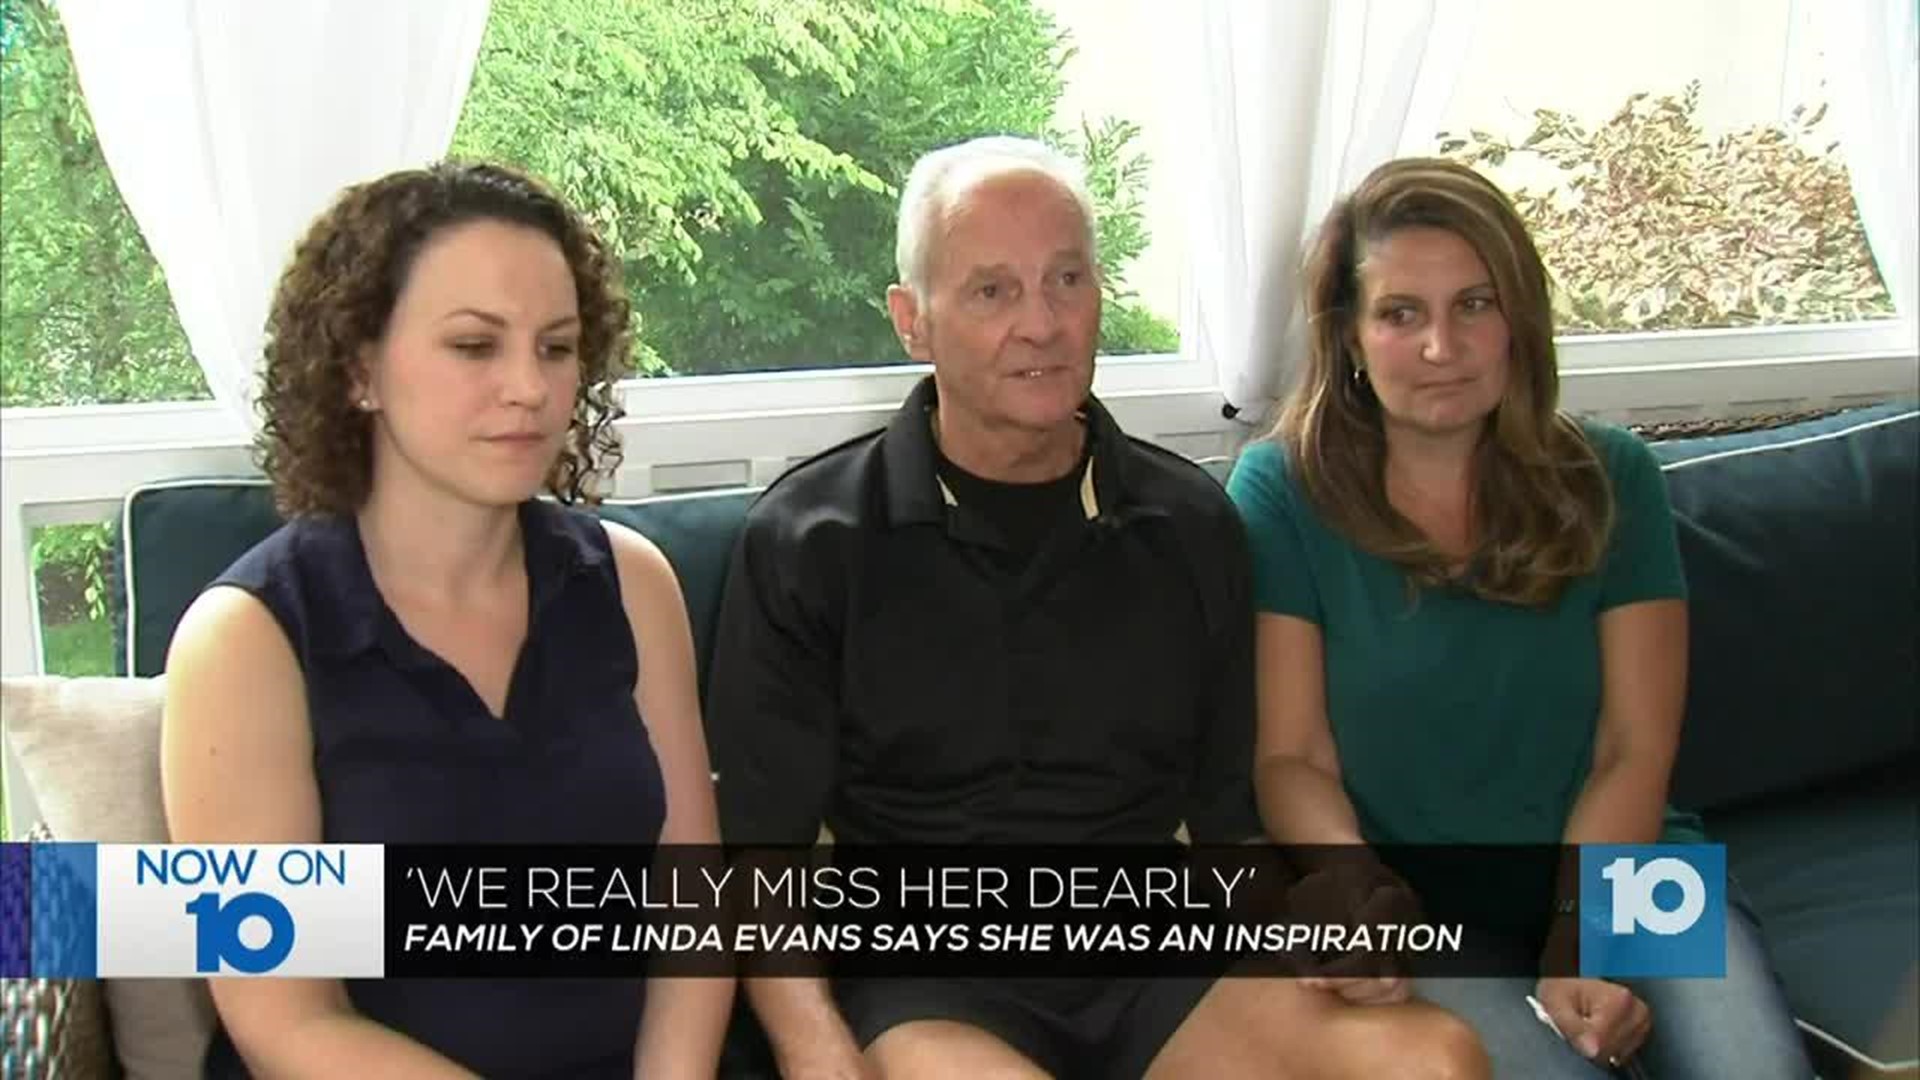 Family of Linda Evans says she was an inspiration